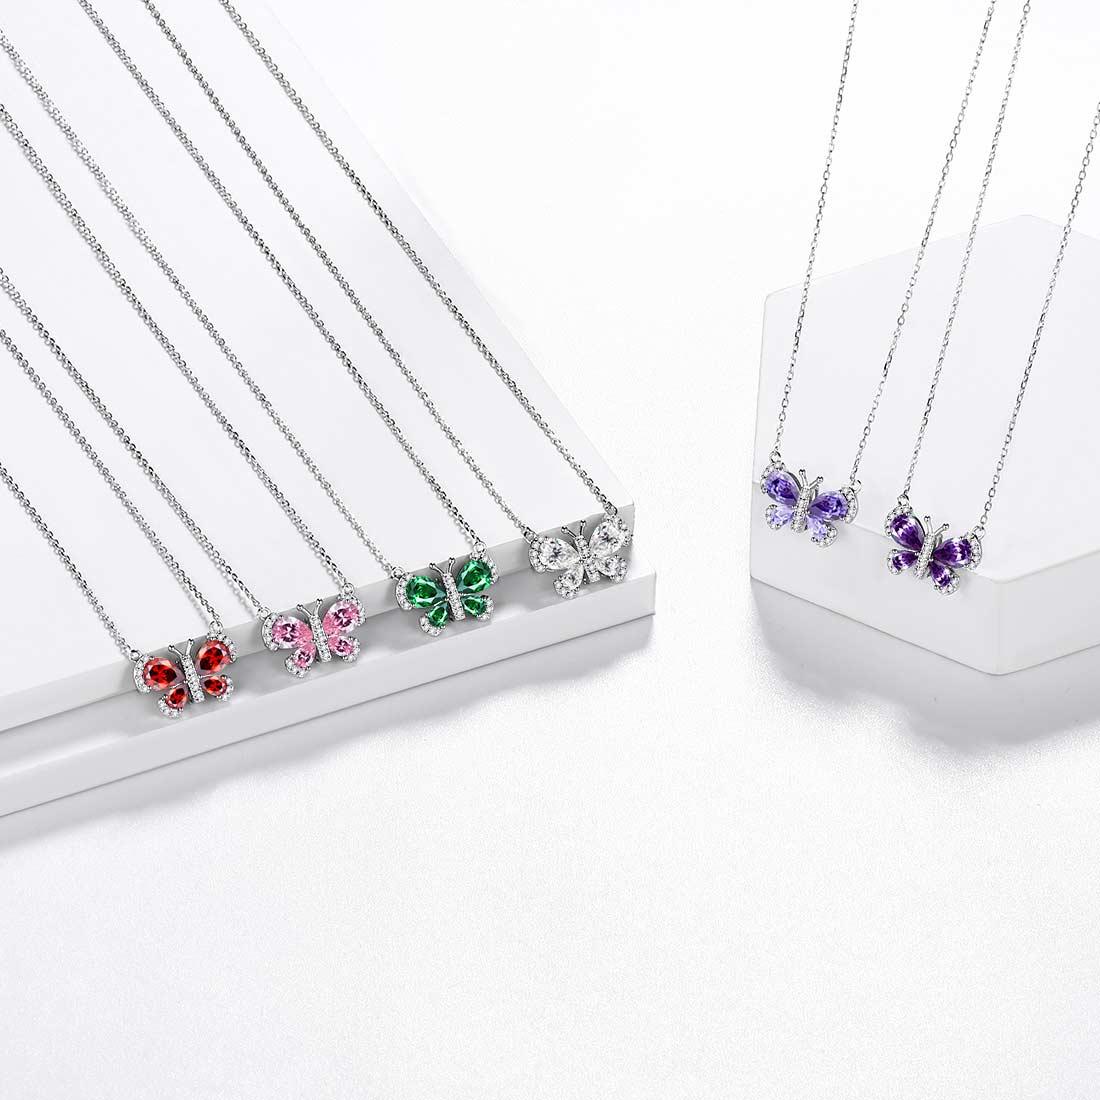 Butterfly Necklace Birthstone October Tourmaline Pendant - Necklaces - Aurora Tears